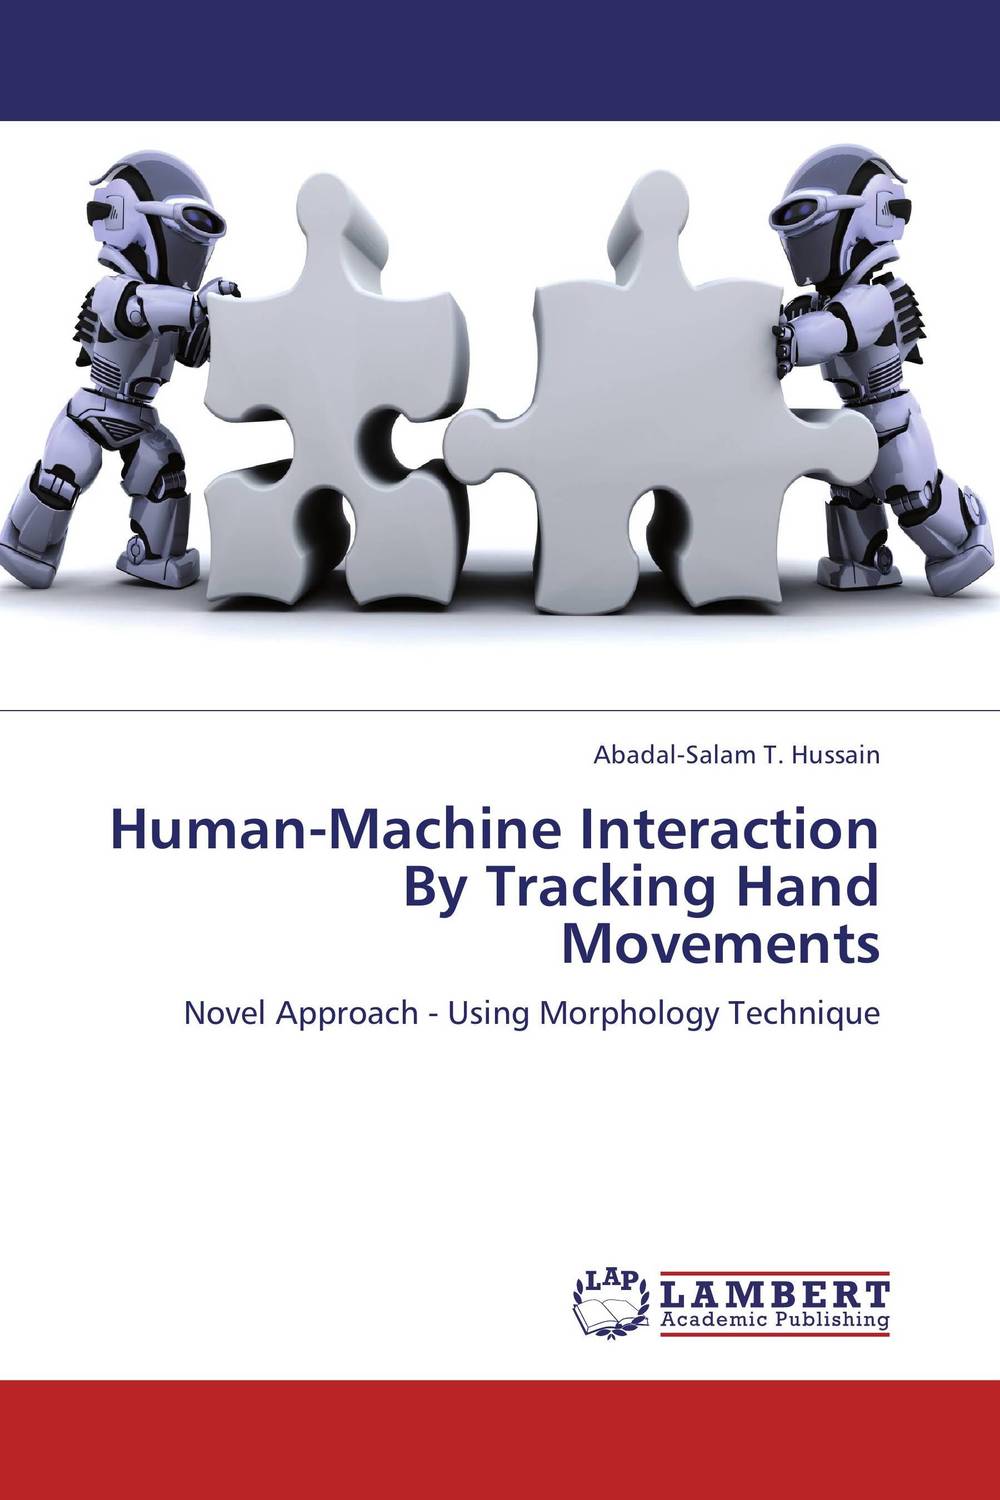 Human-Machine Interaction By Tracking Hand Movements